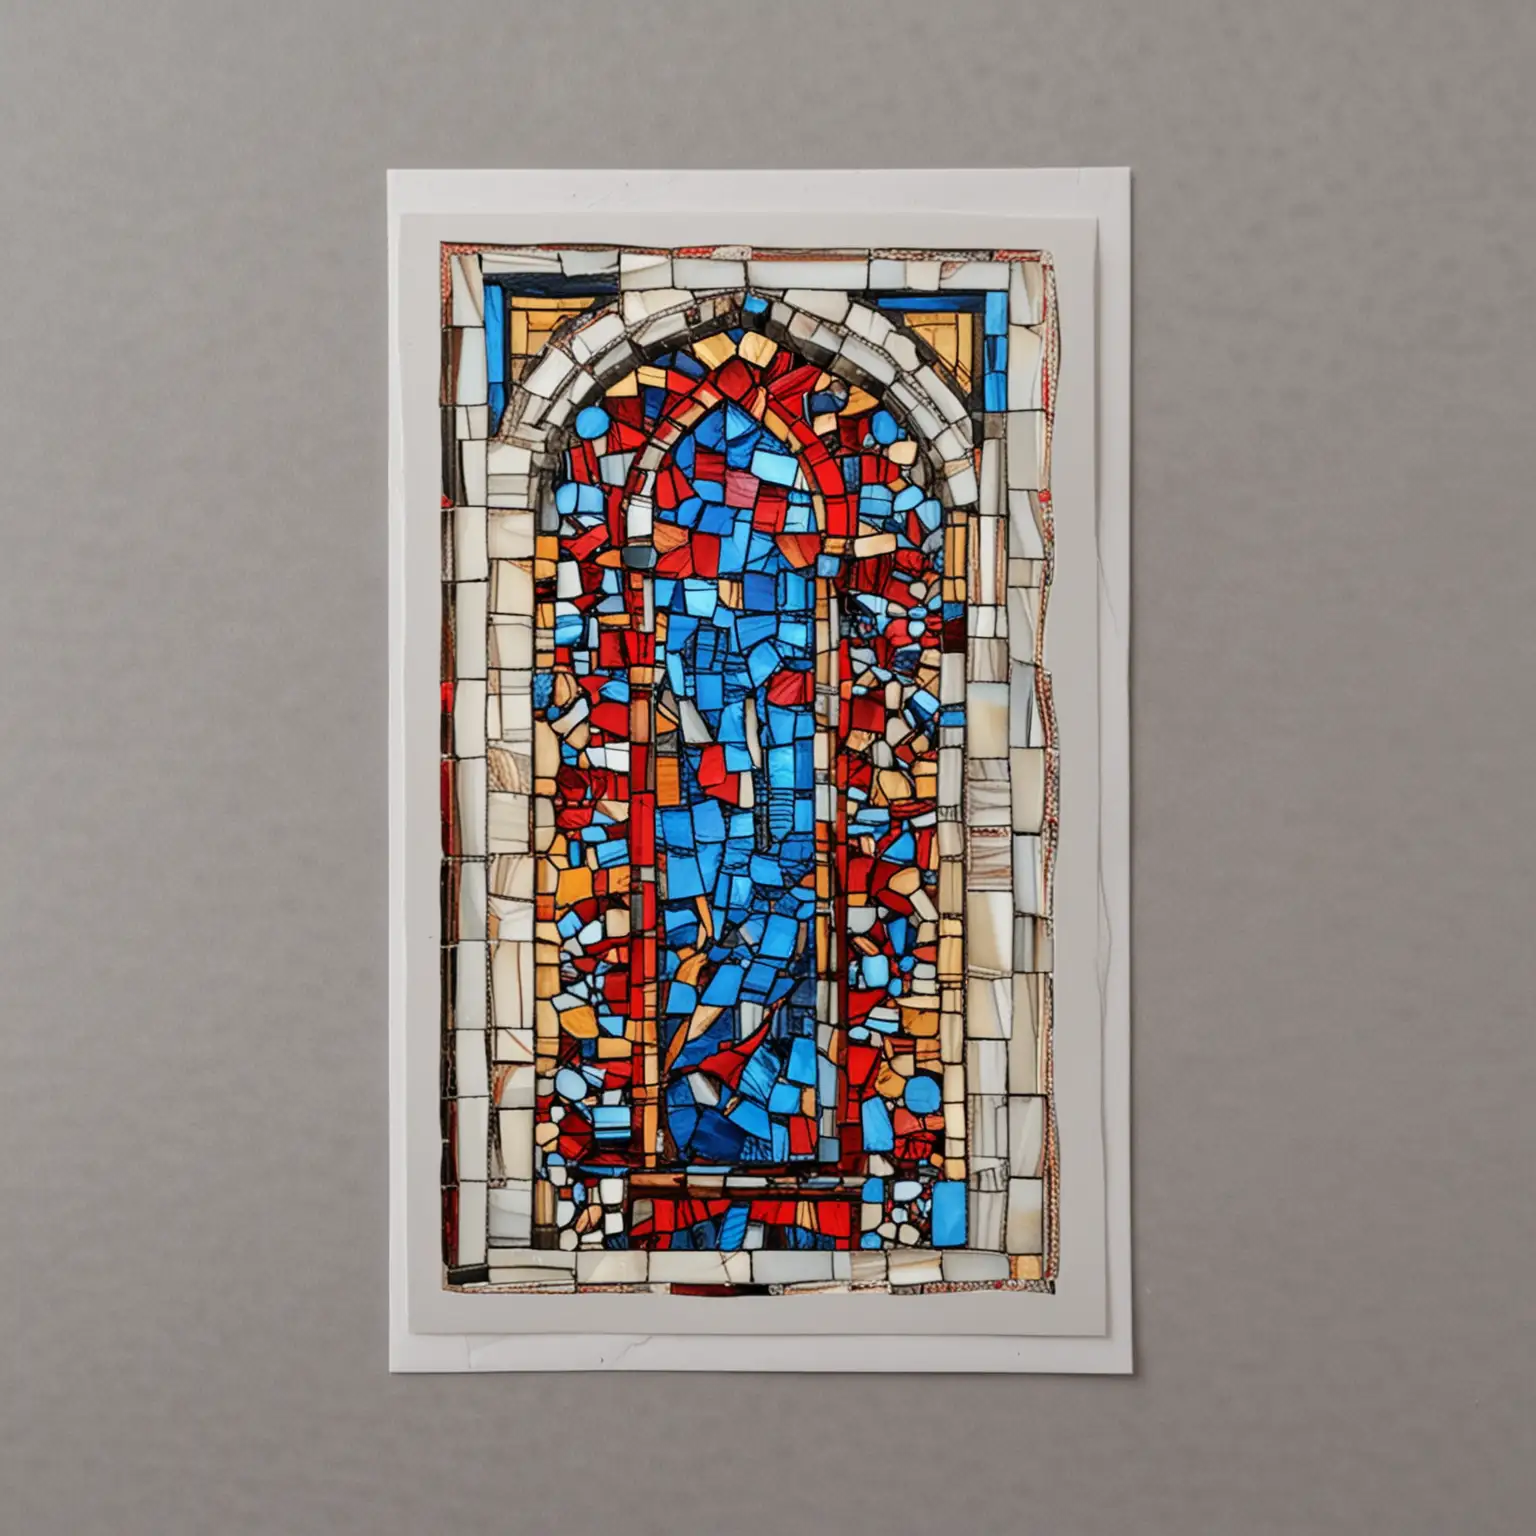 Greeting card 11.5 x 17 mm. Mosaic strip on left hand size of the card to be 1 cm wide x 16 cm long. To be stained glass design. Colors to be red and blue